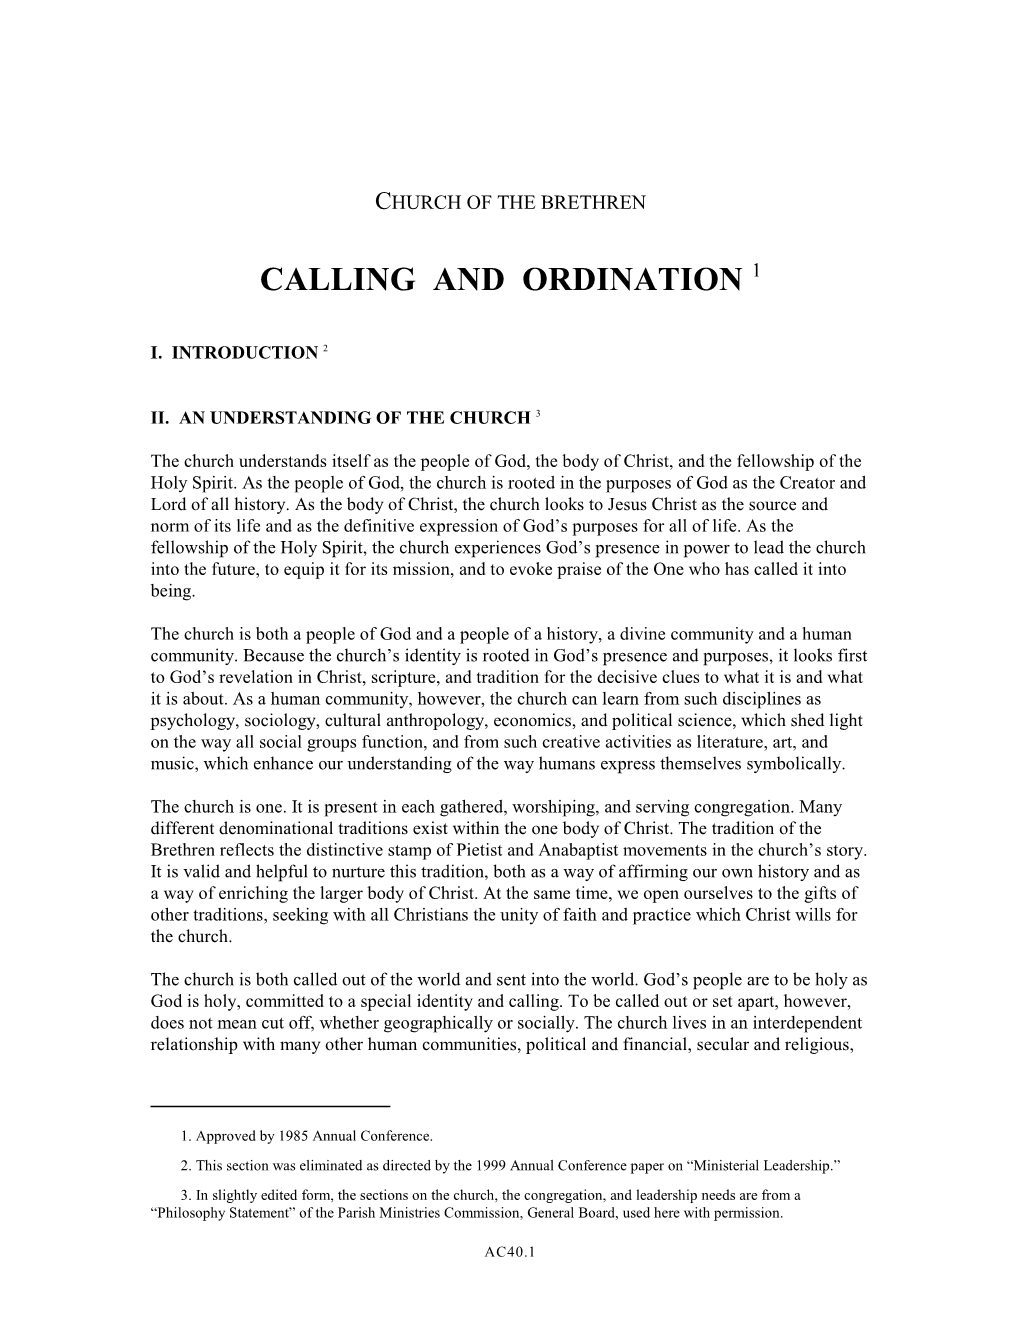 Calling and Ordination 1